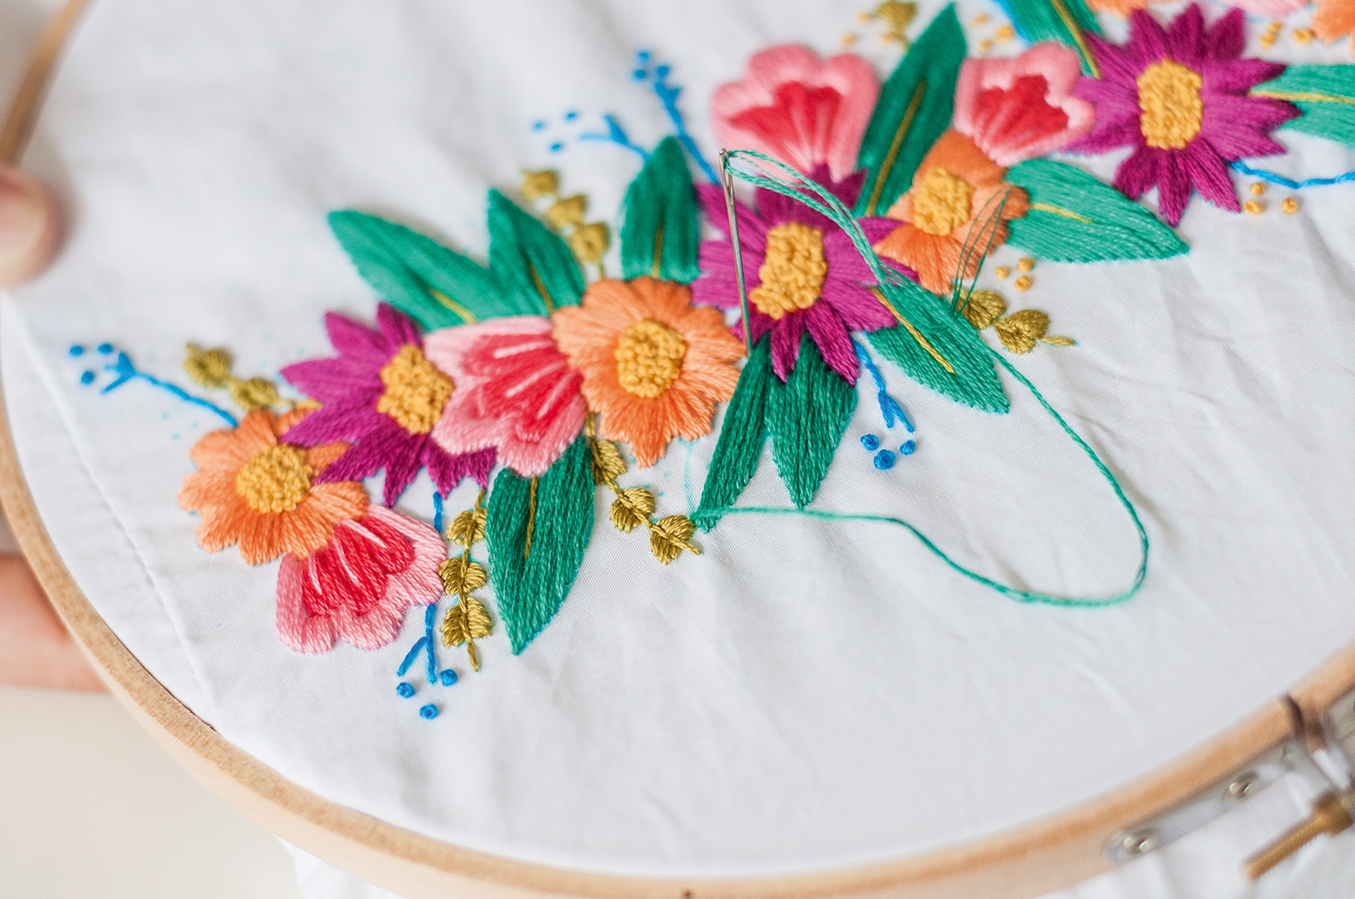 DIY embroidered pillow case - Gathered